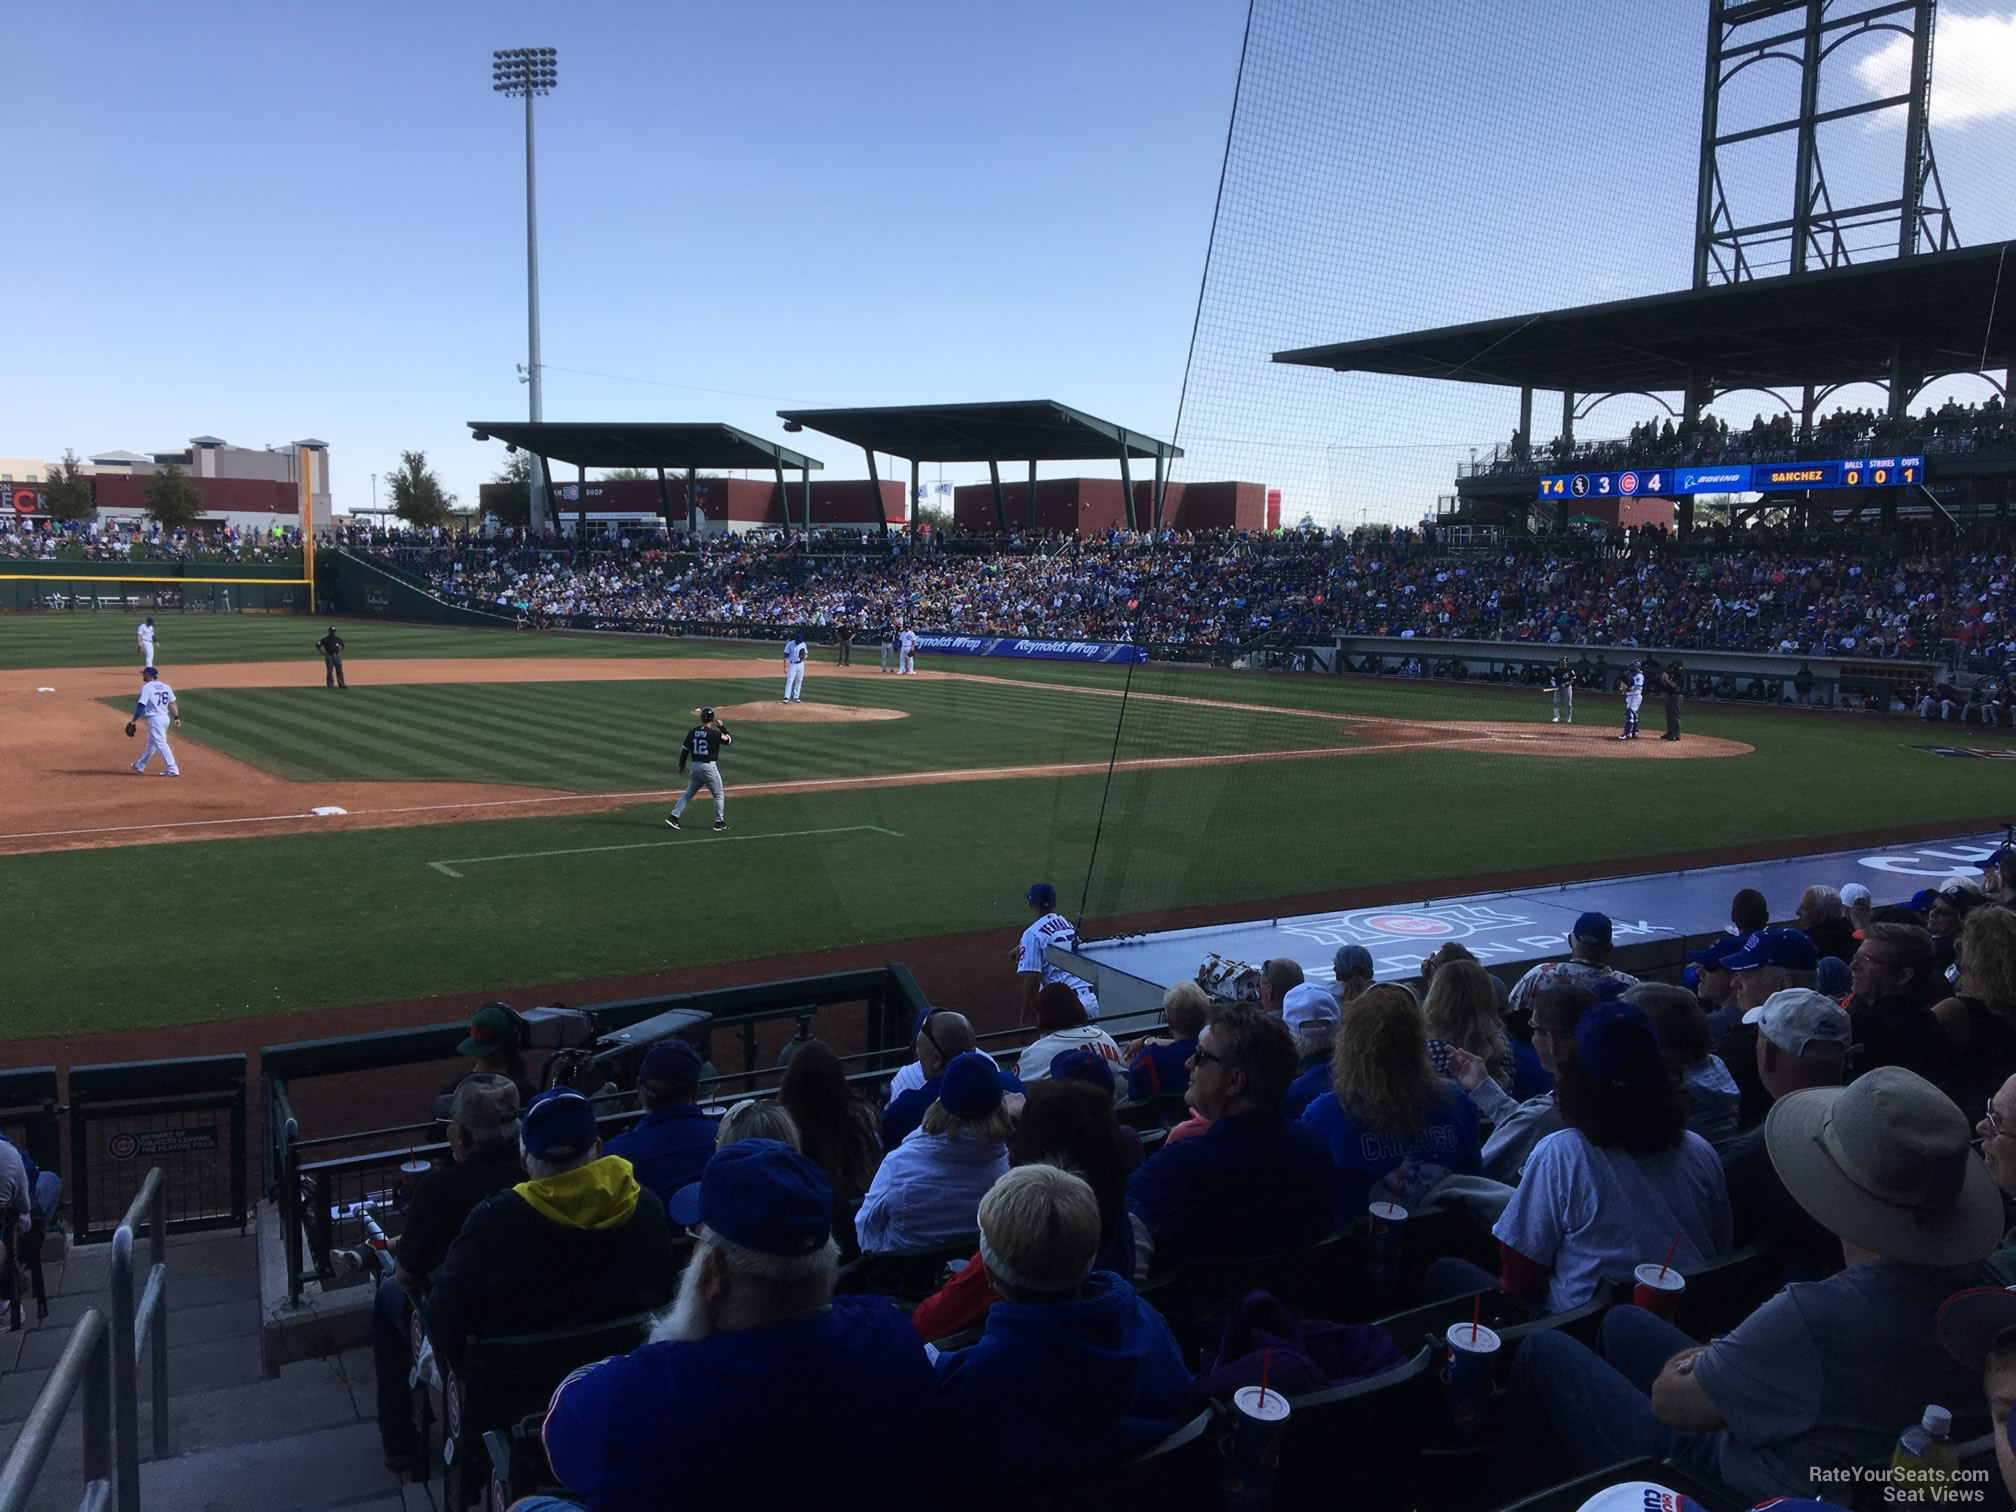 section 107, row 12 seat view  - sloan park